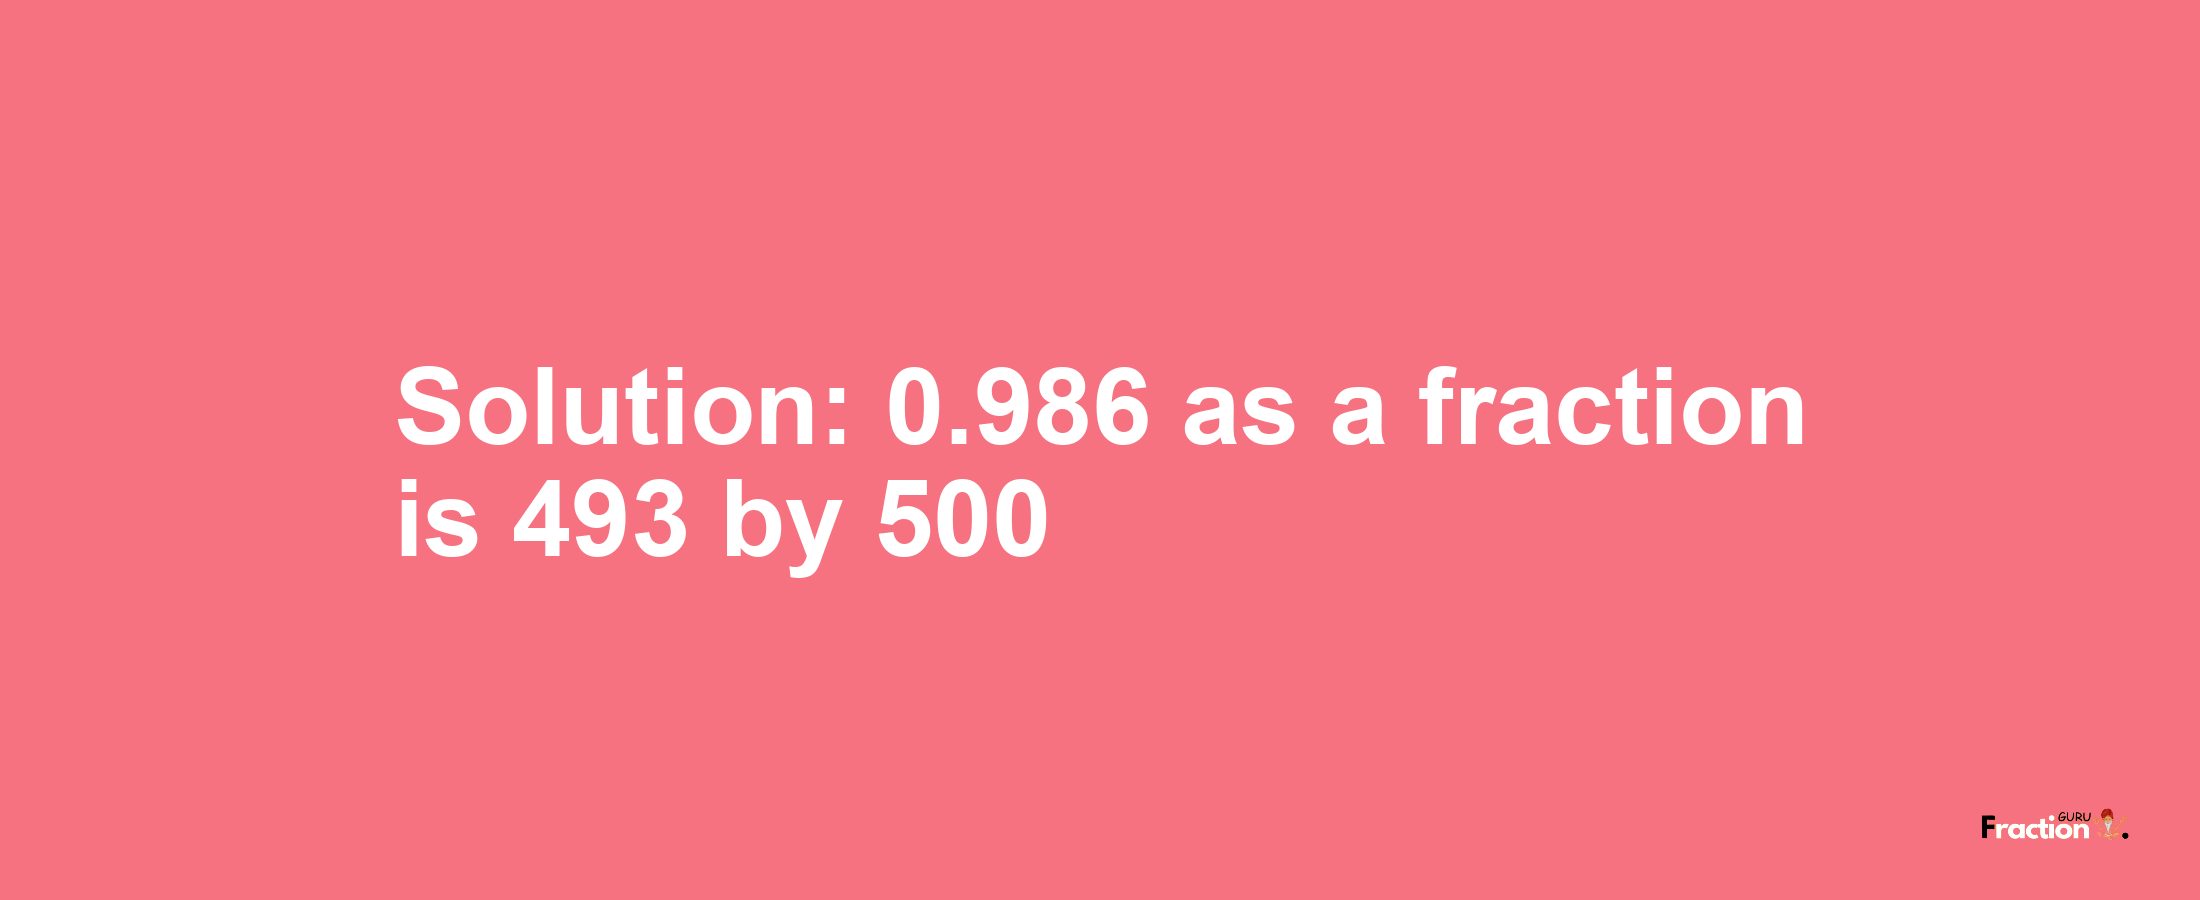 Solution:0.986 as a fraction is 493/500